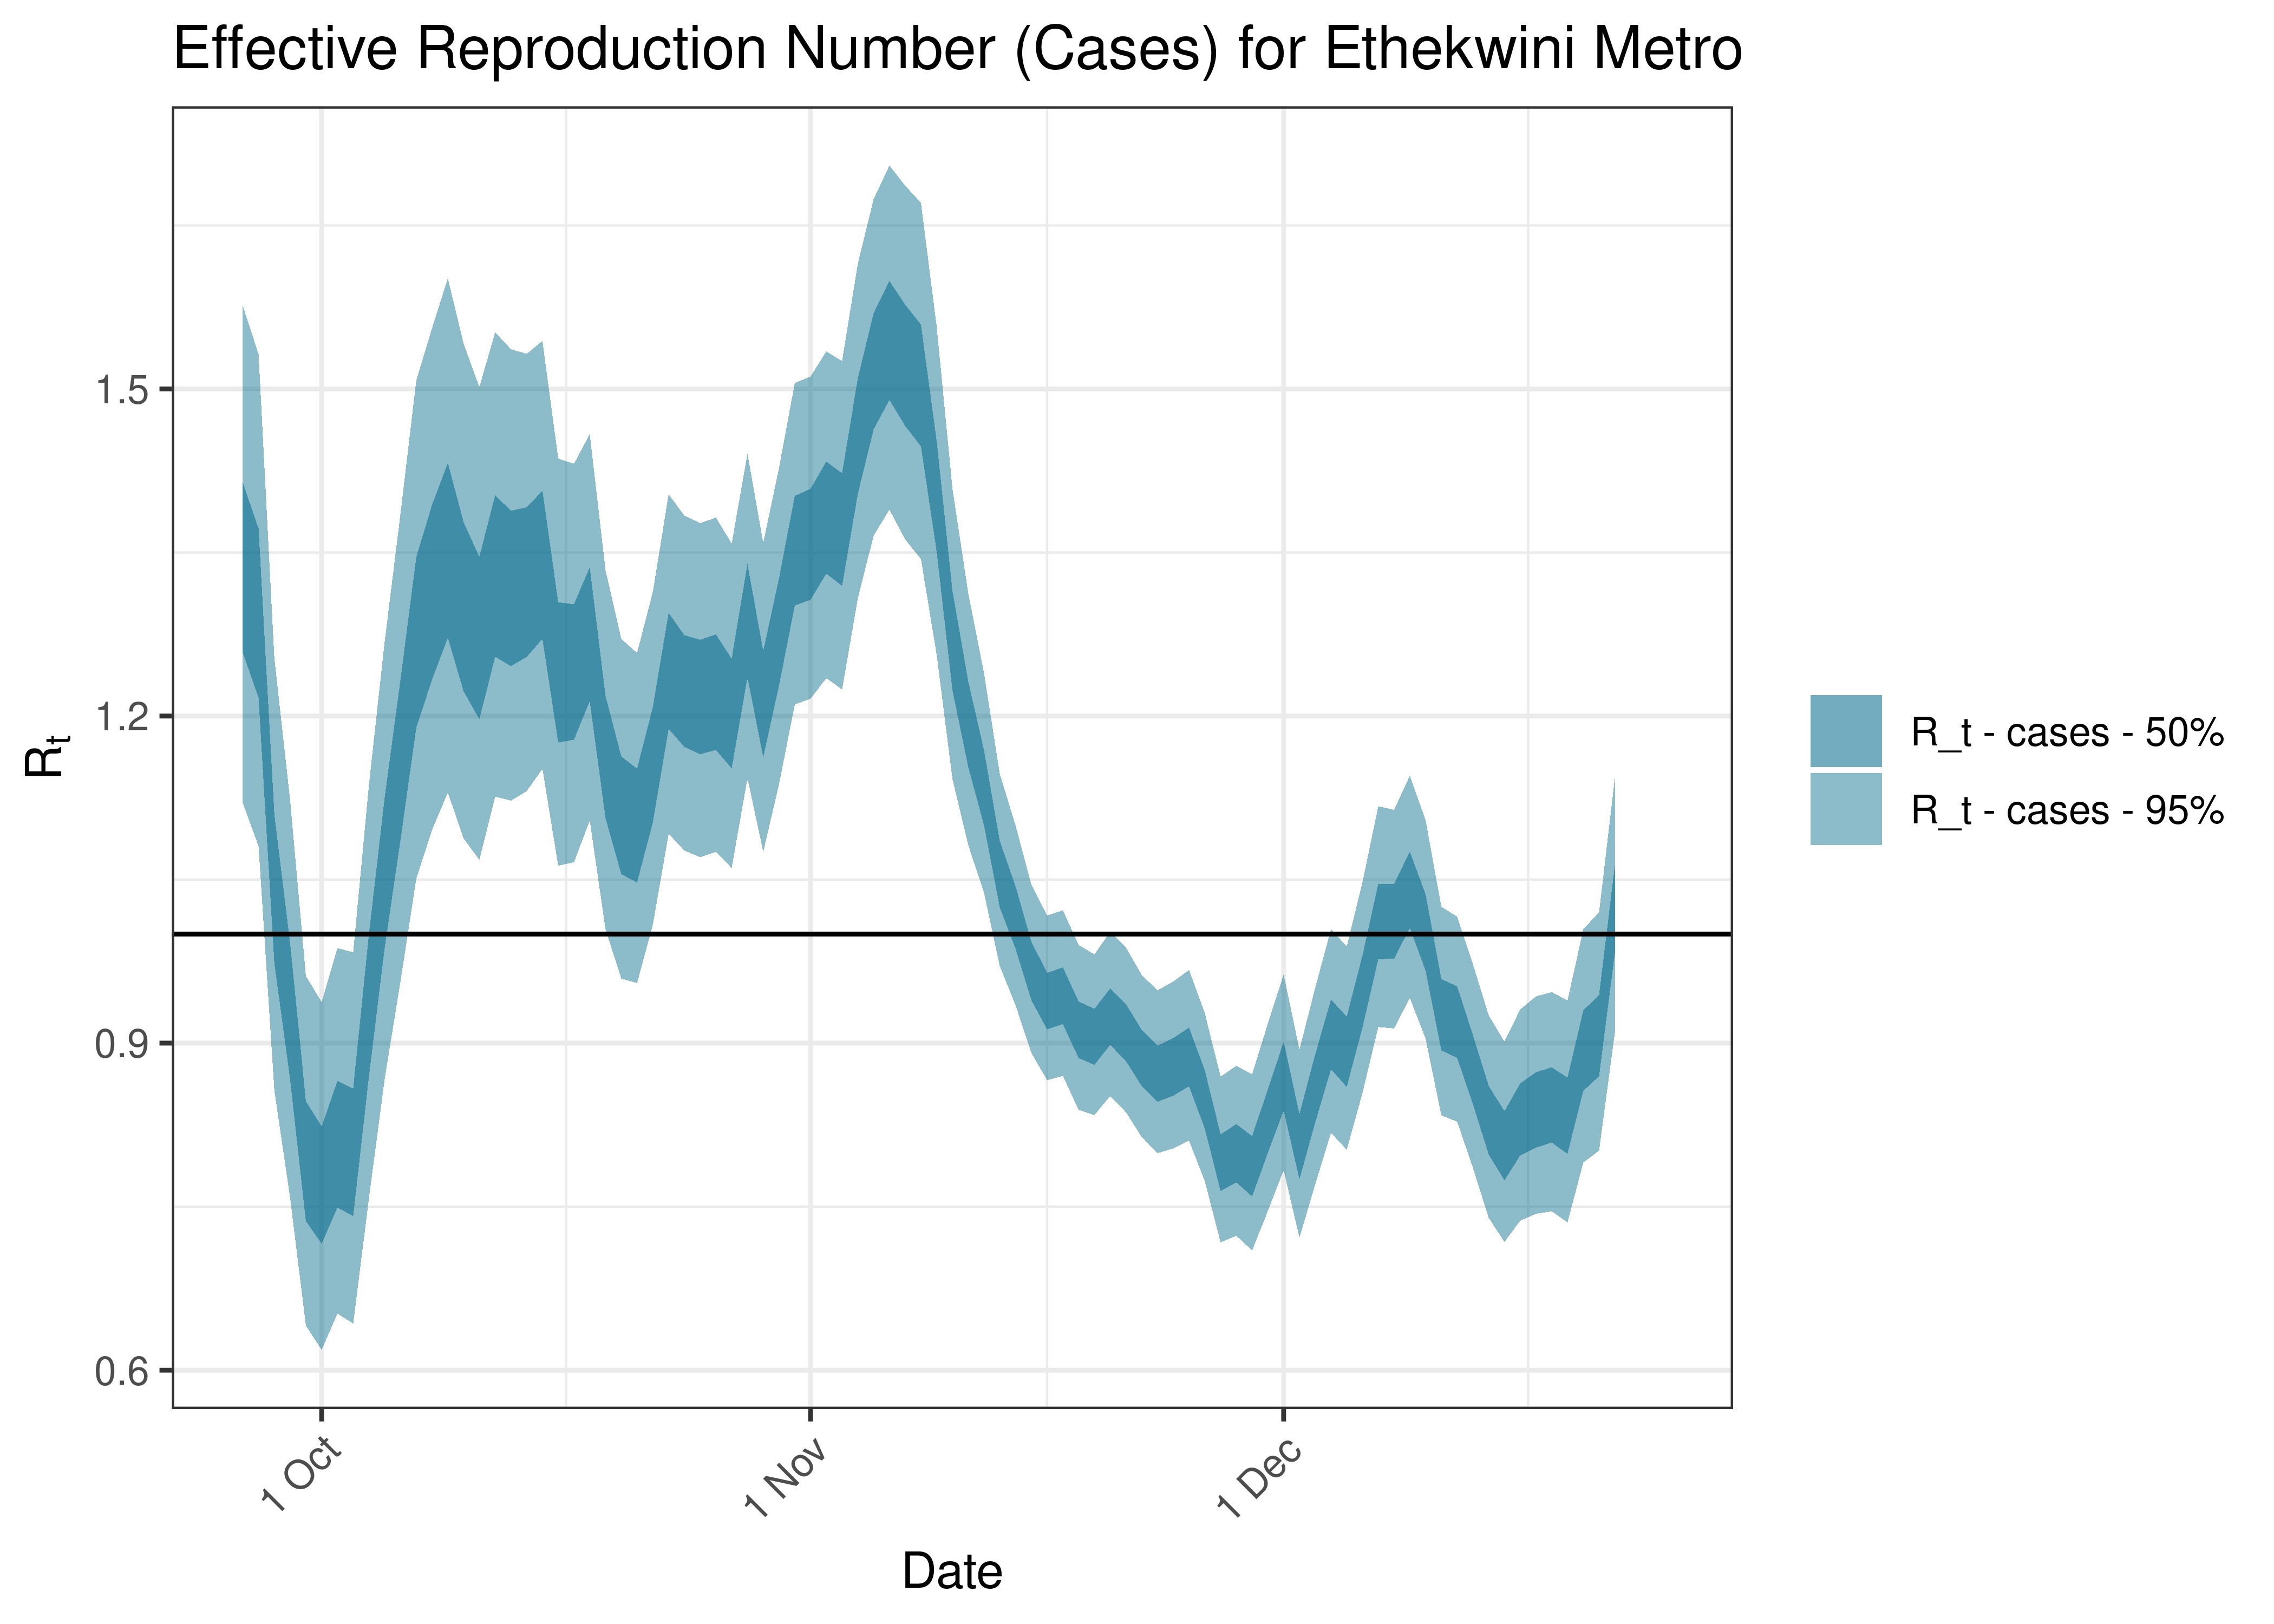 Estimated Effective Reproduction Number Based on Cases for Ethekwini Metro over last 90 days